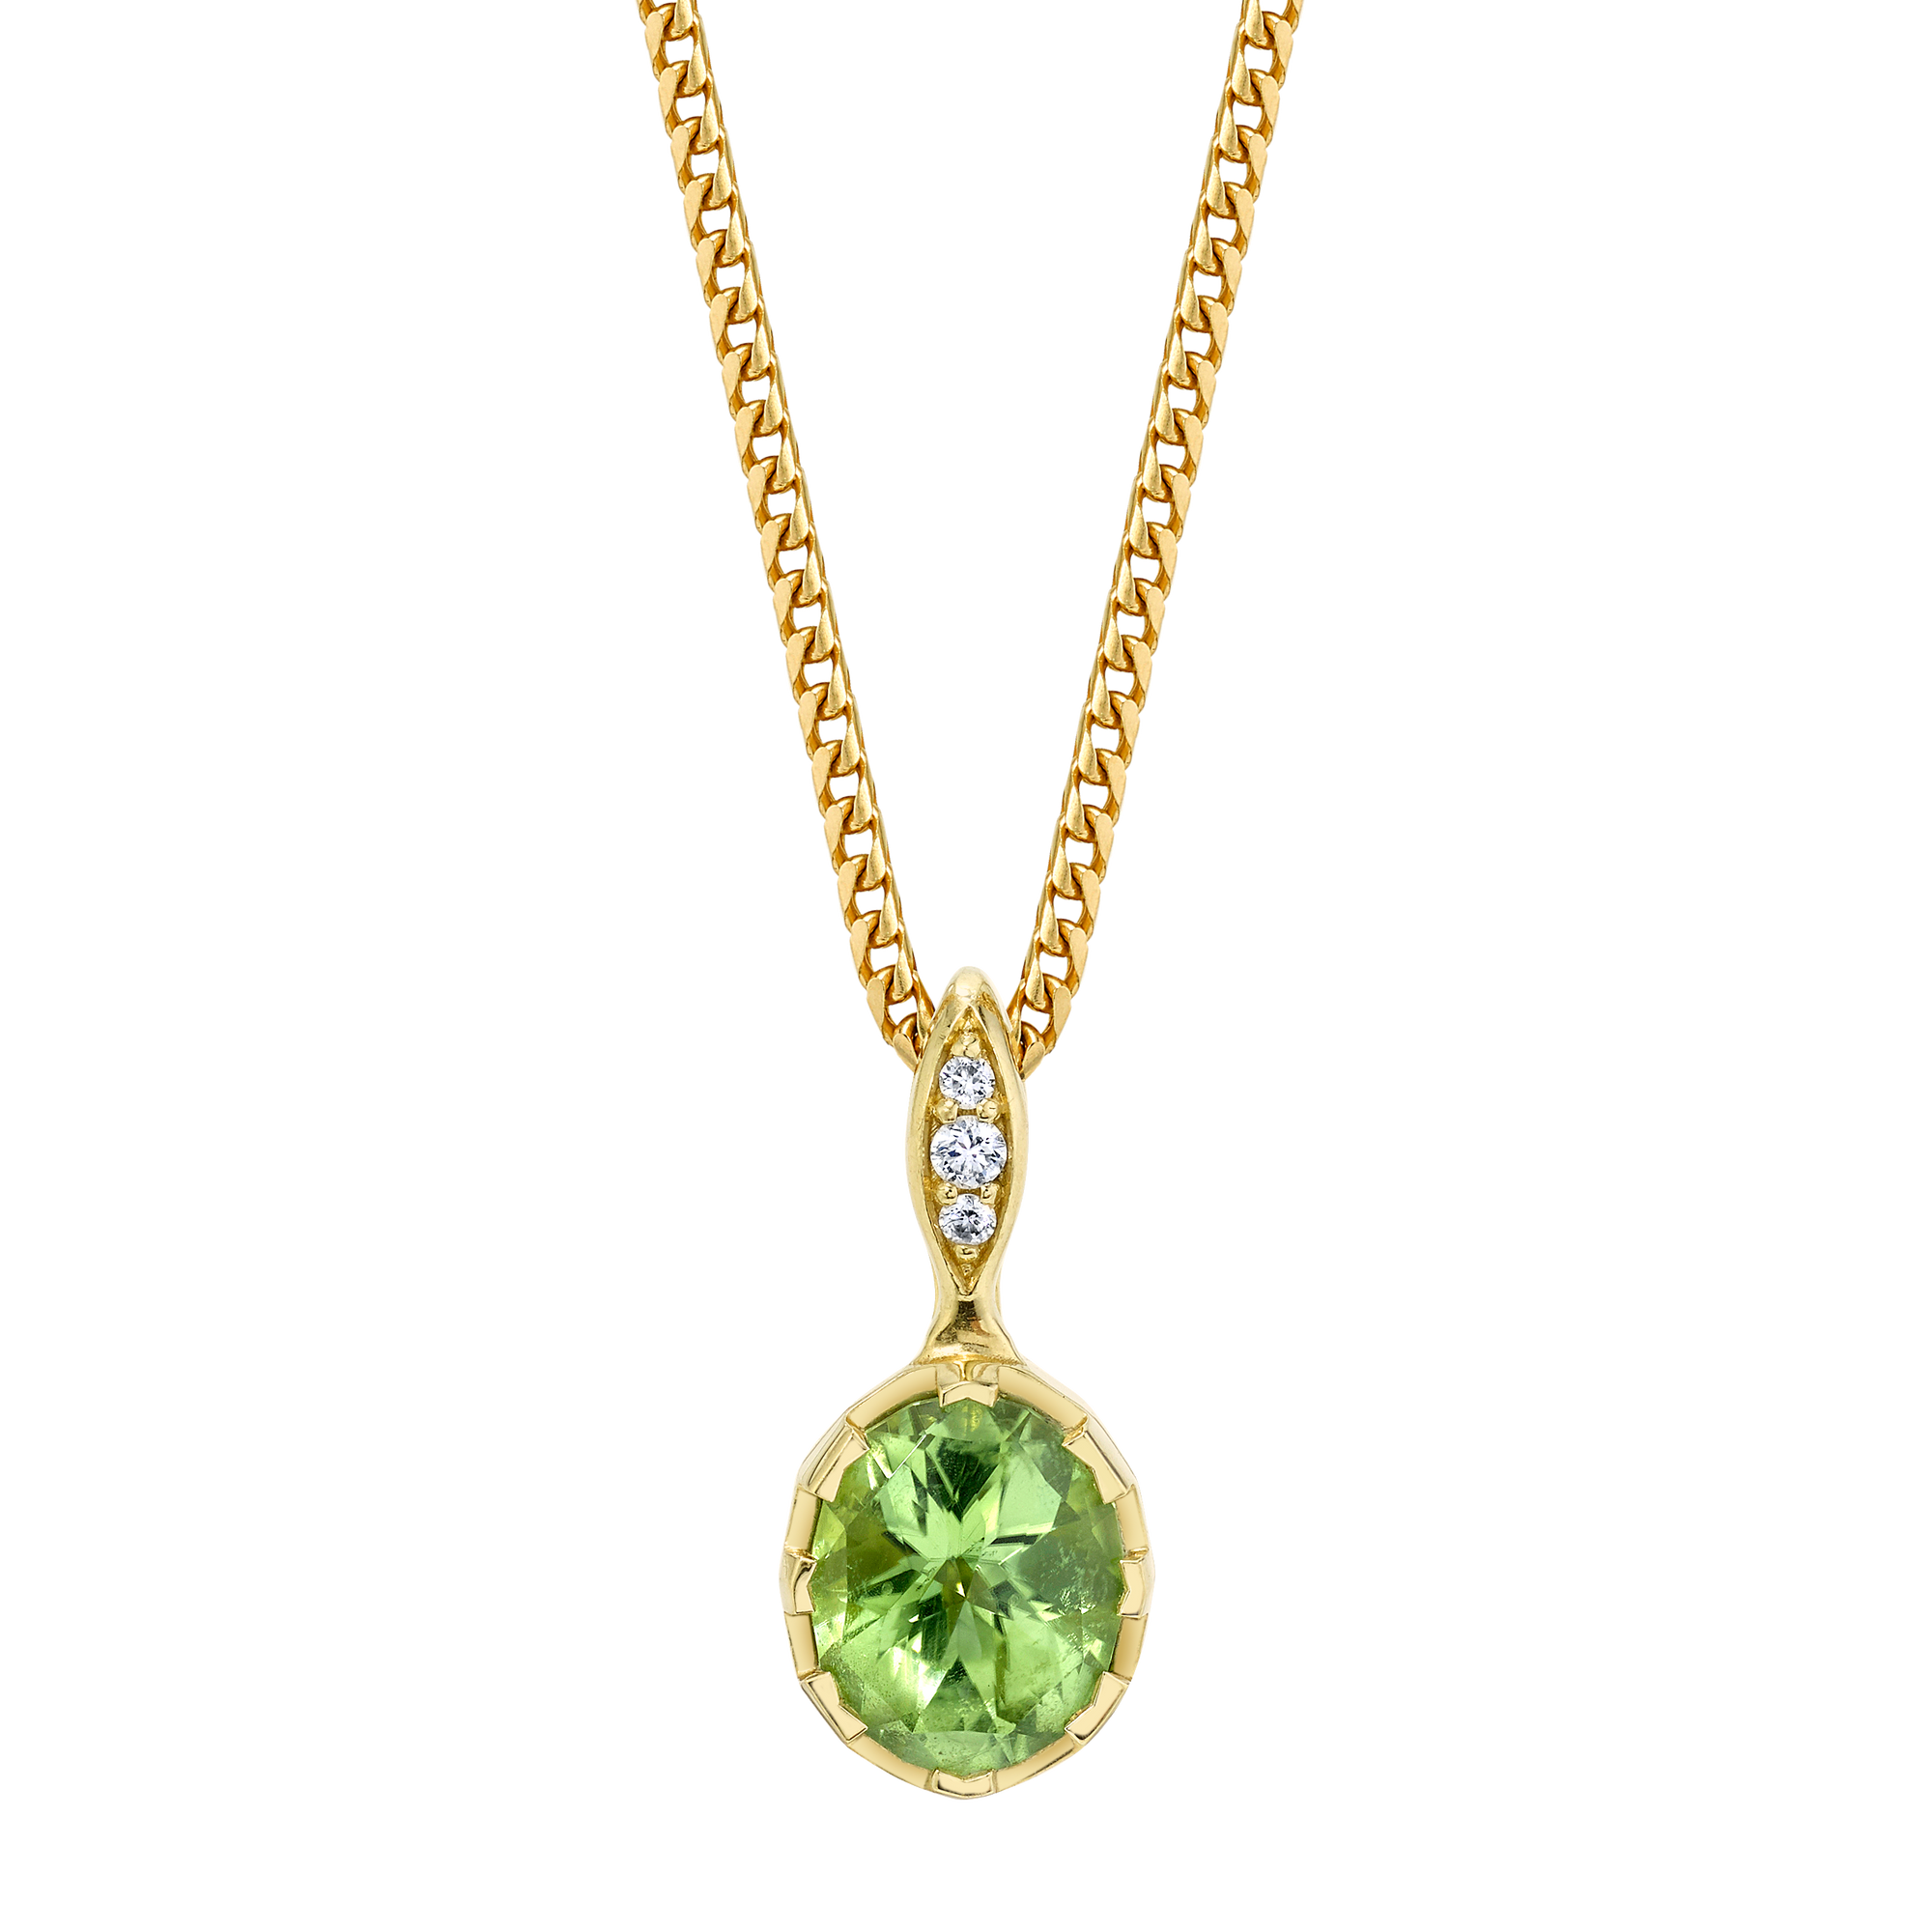 Modern Oval Necklace featuring a Precision-Cut Green Tourmaline with Diamond Pave